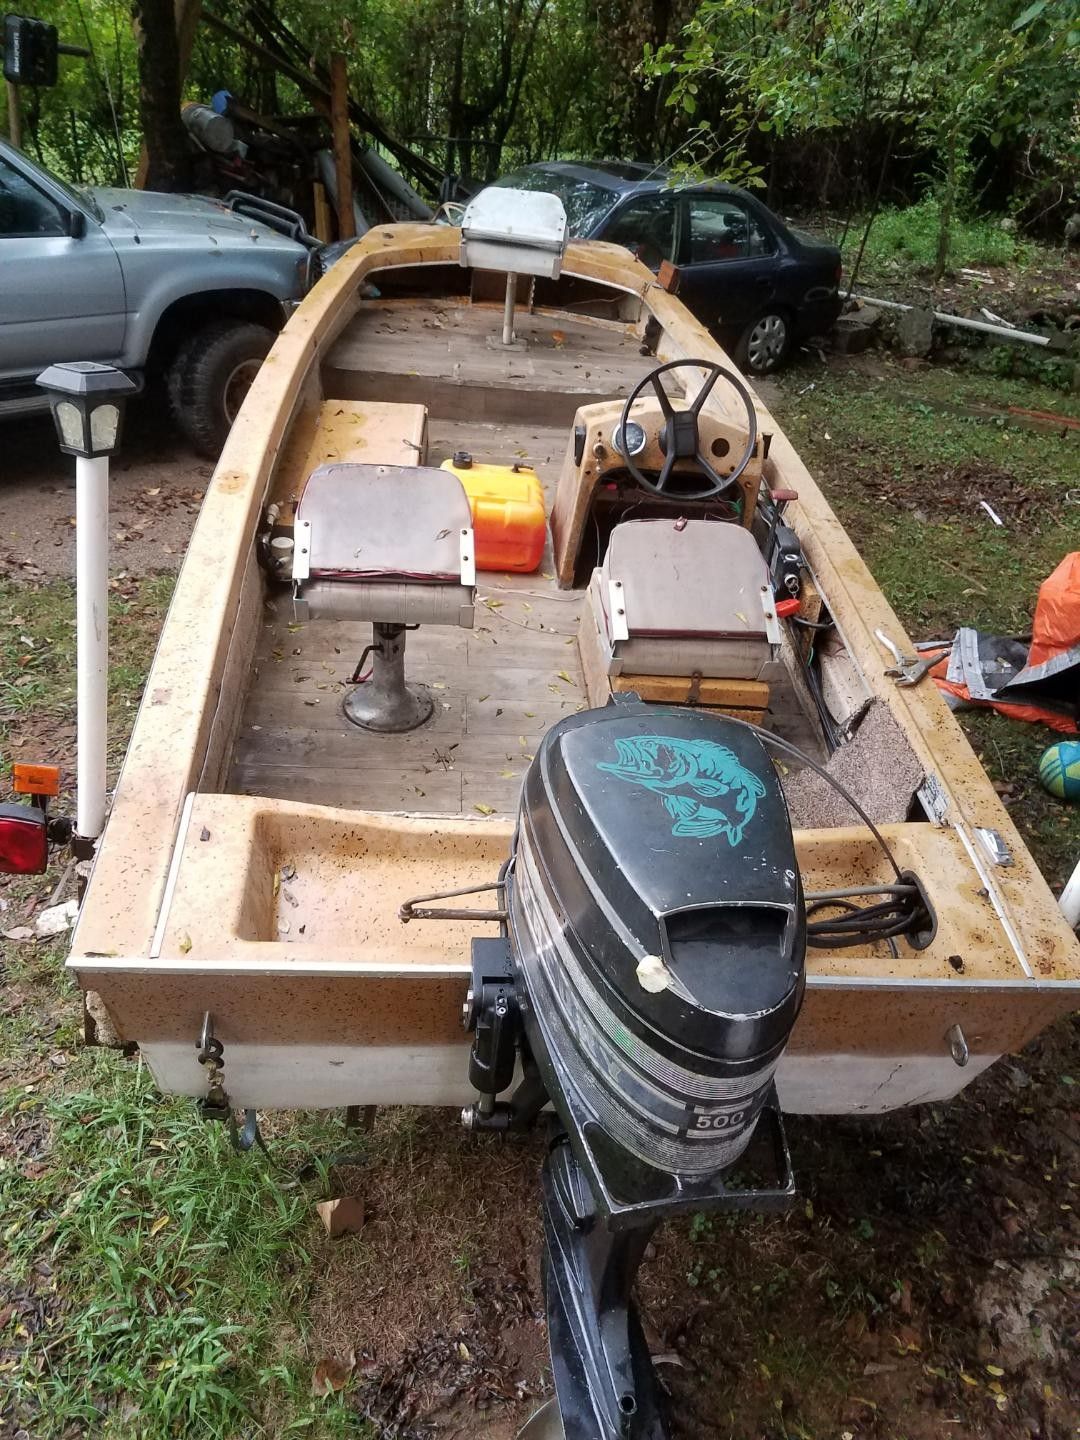 mercury of 50 hp measures 15 "1970. new water pump and floor, the trailer has new cable and lights, it does not start.